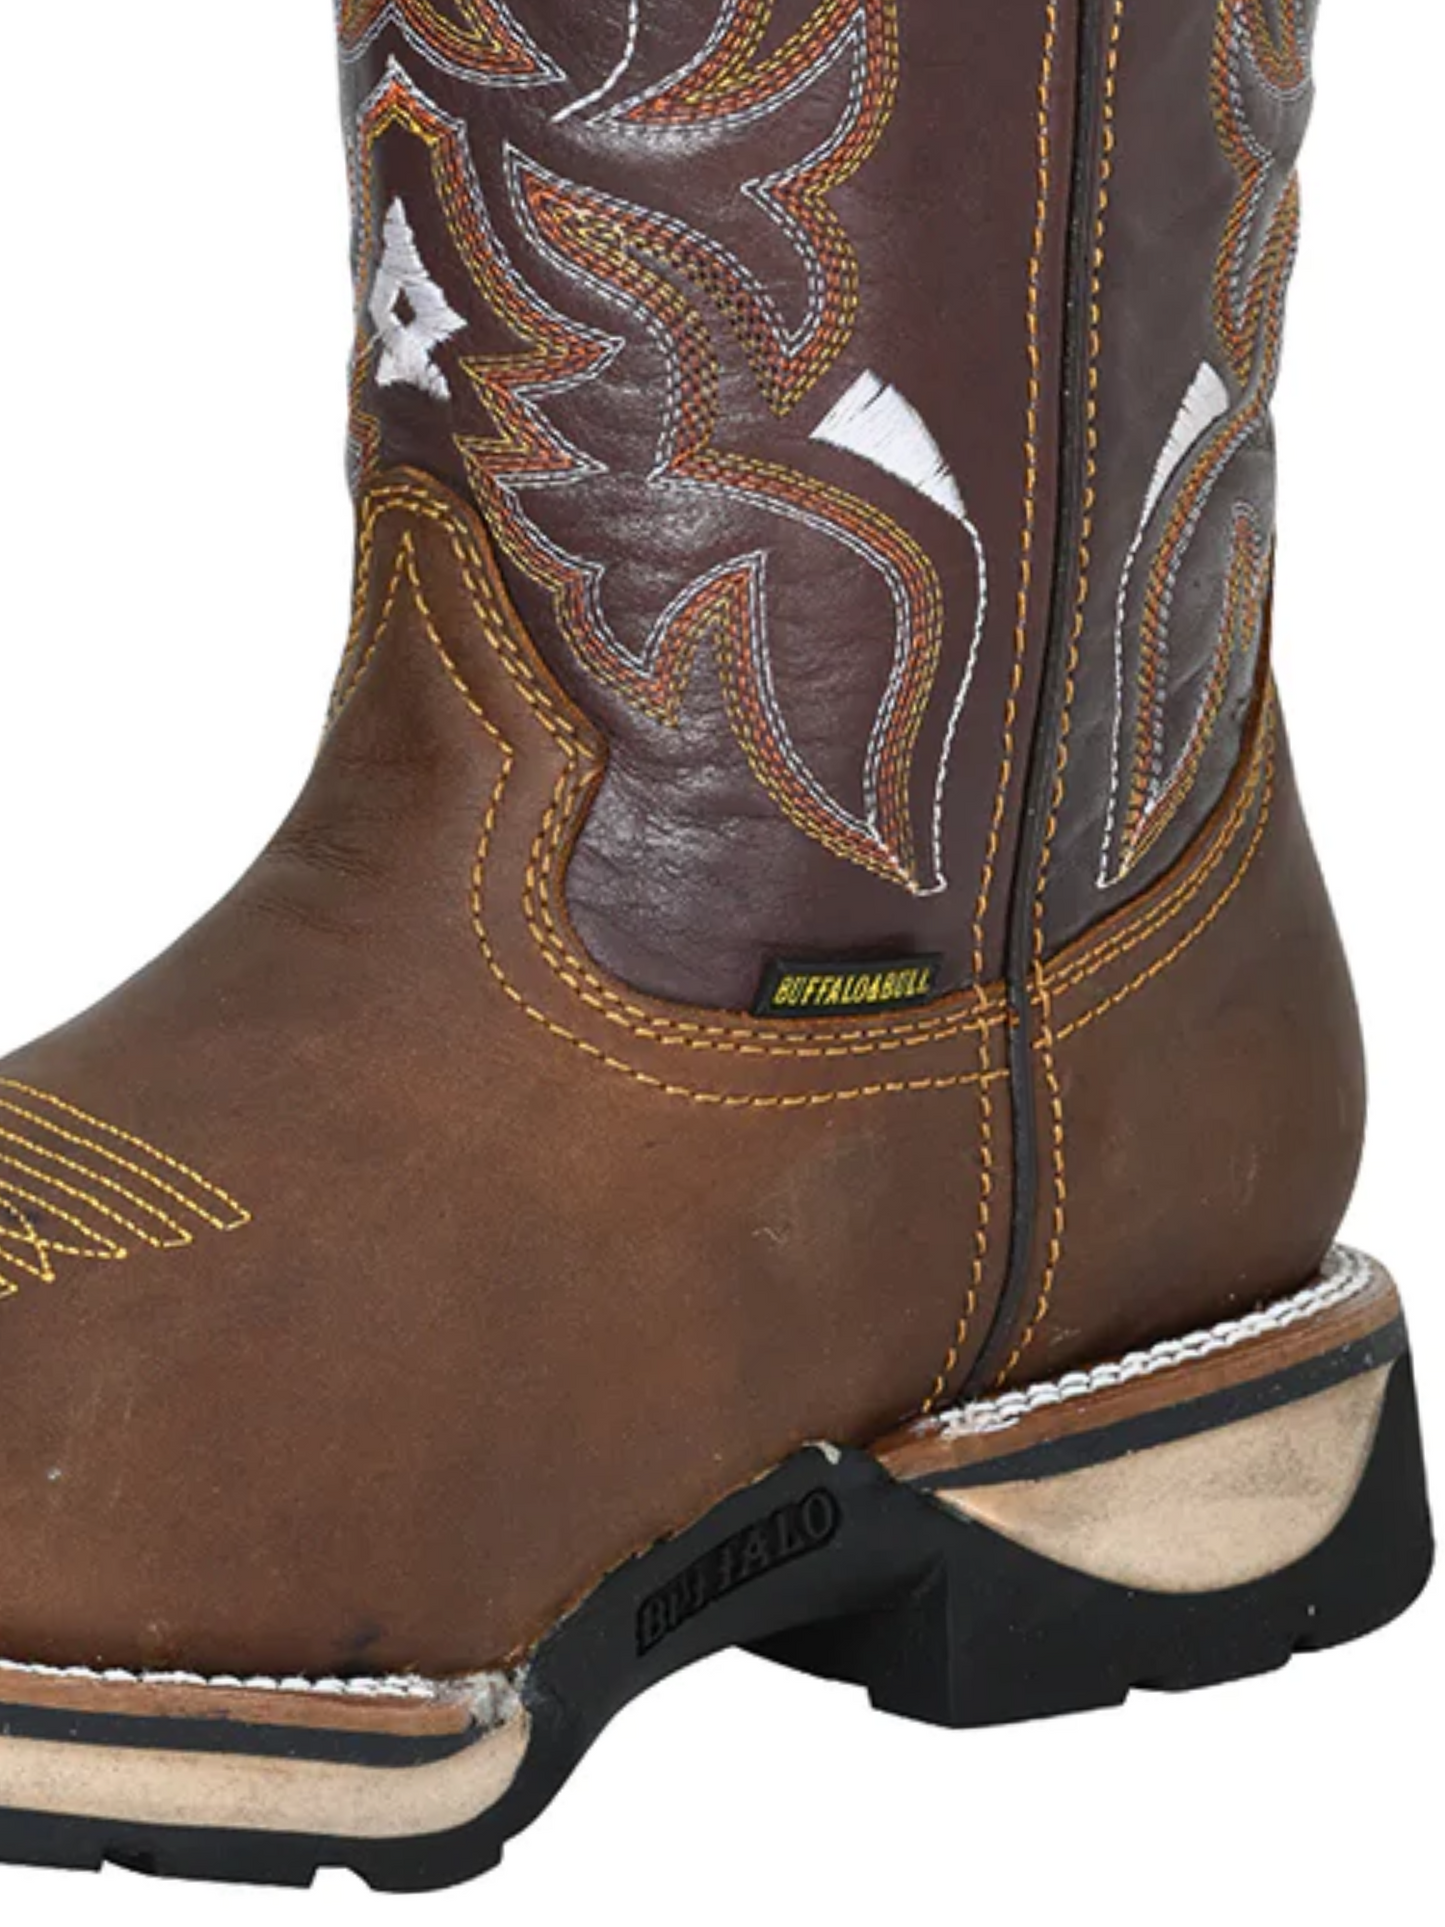 Men's Genuine Leather Soft Toe Pull-On Tube Rodeo Work Boots 'Buffalo' - ID: 123730 Work Boots Buffalo